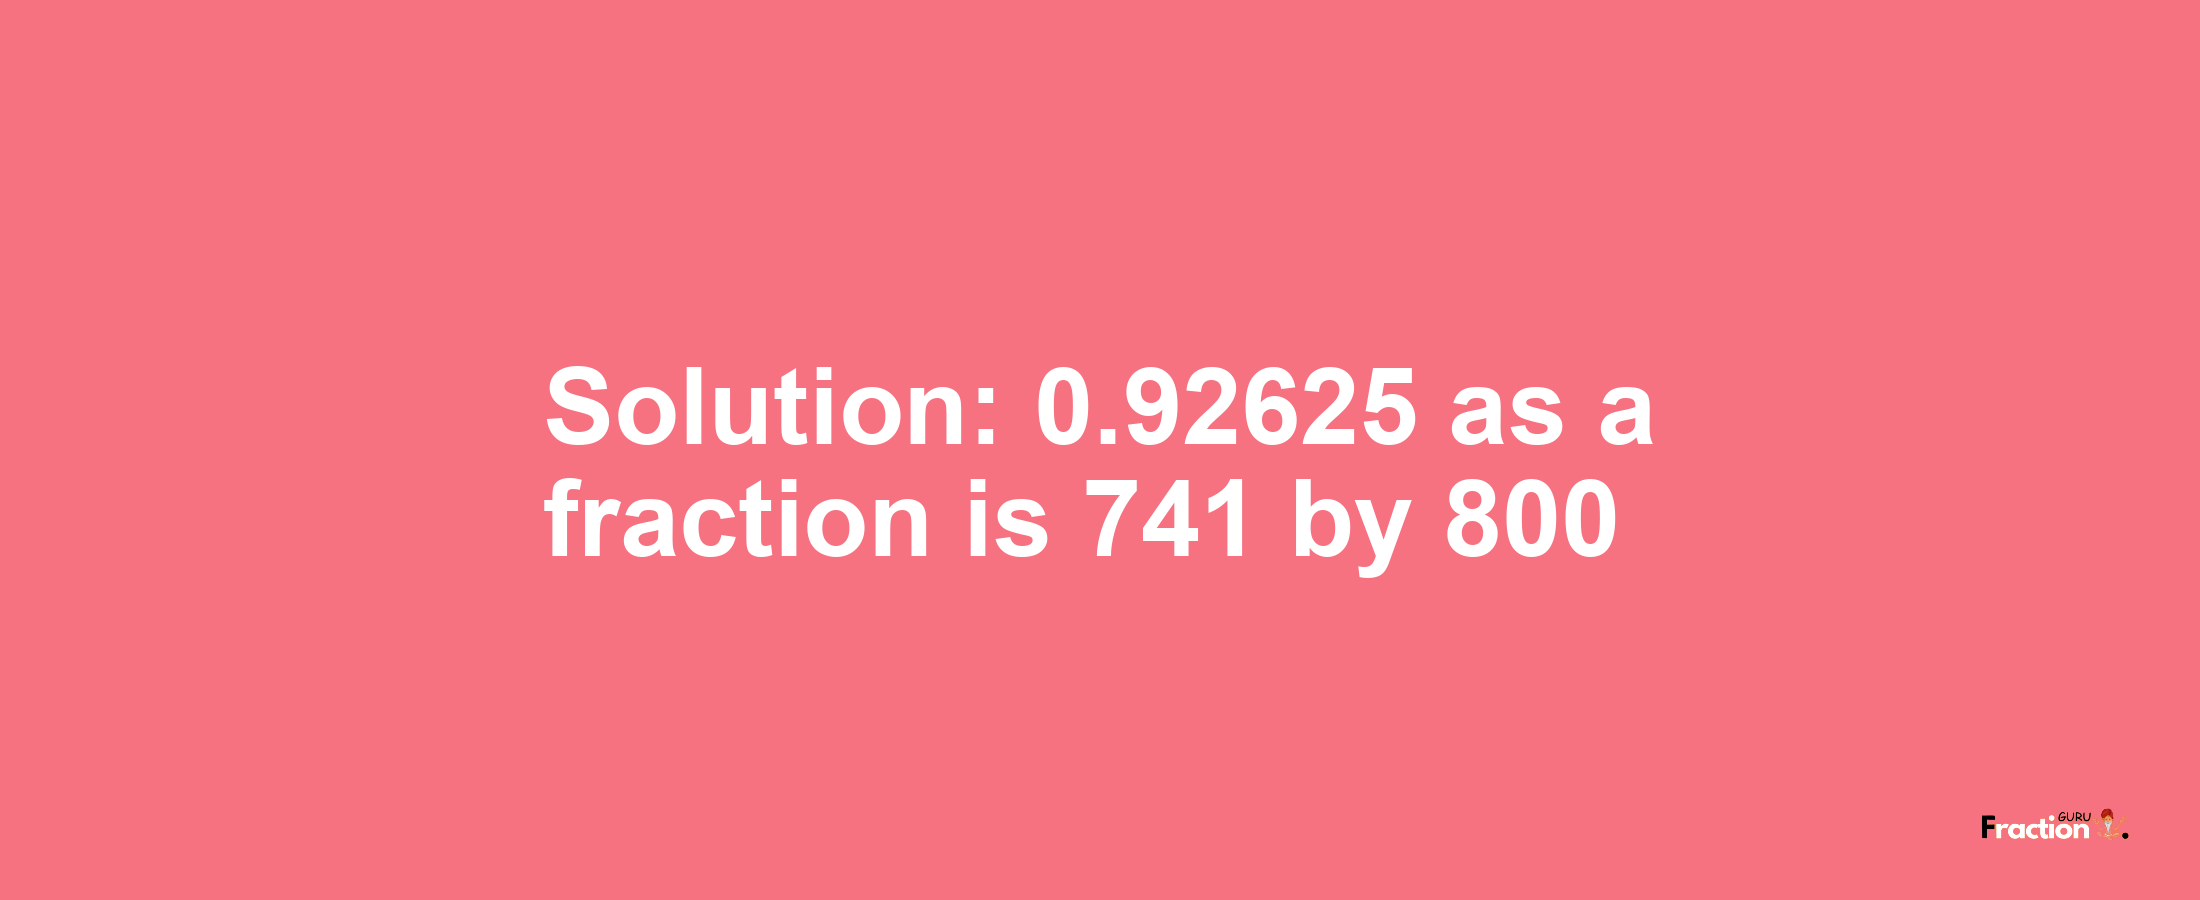 Solution:0.92625 as a fraction is 741/800